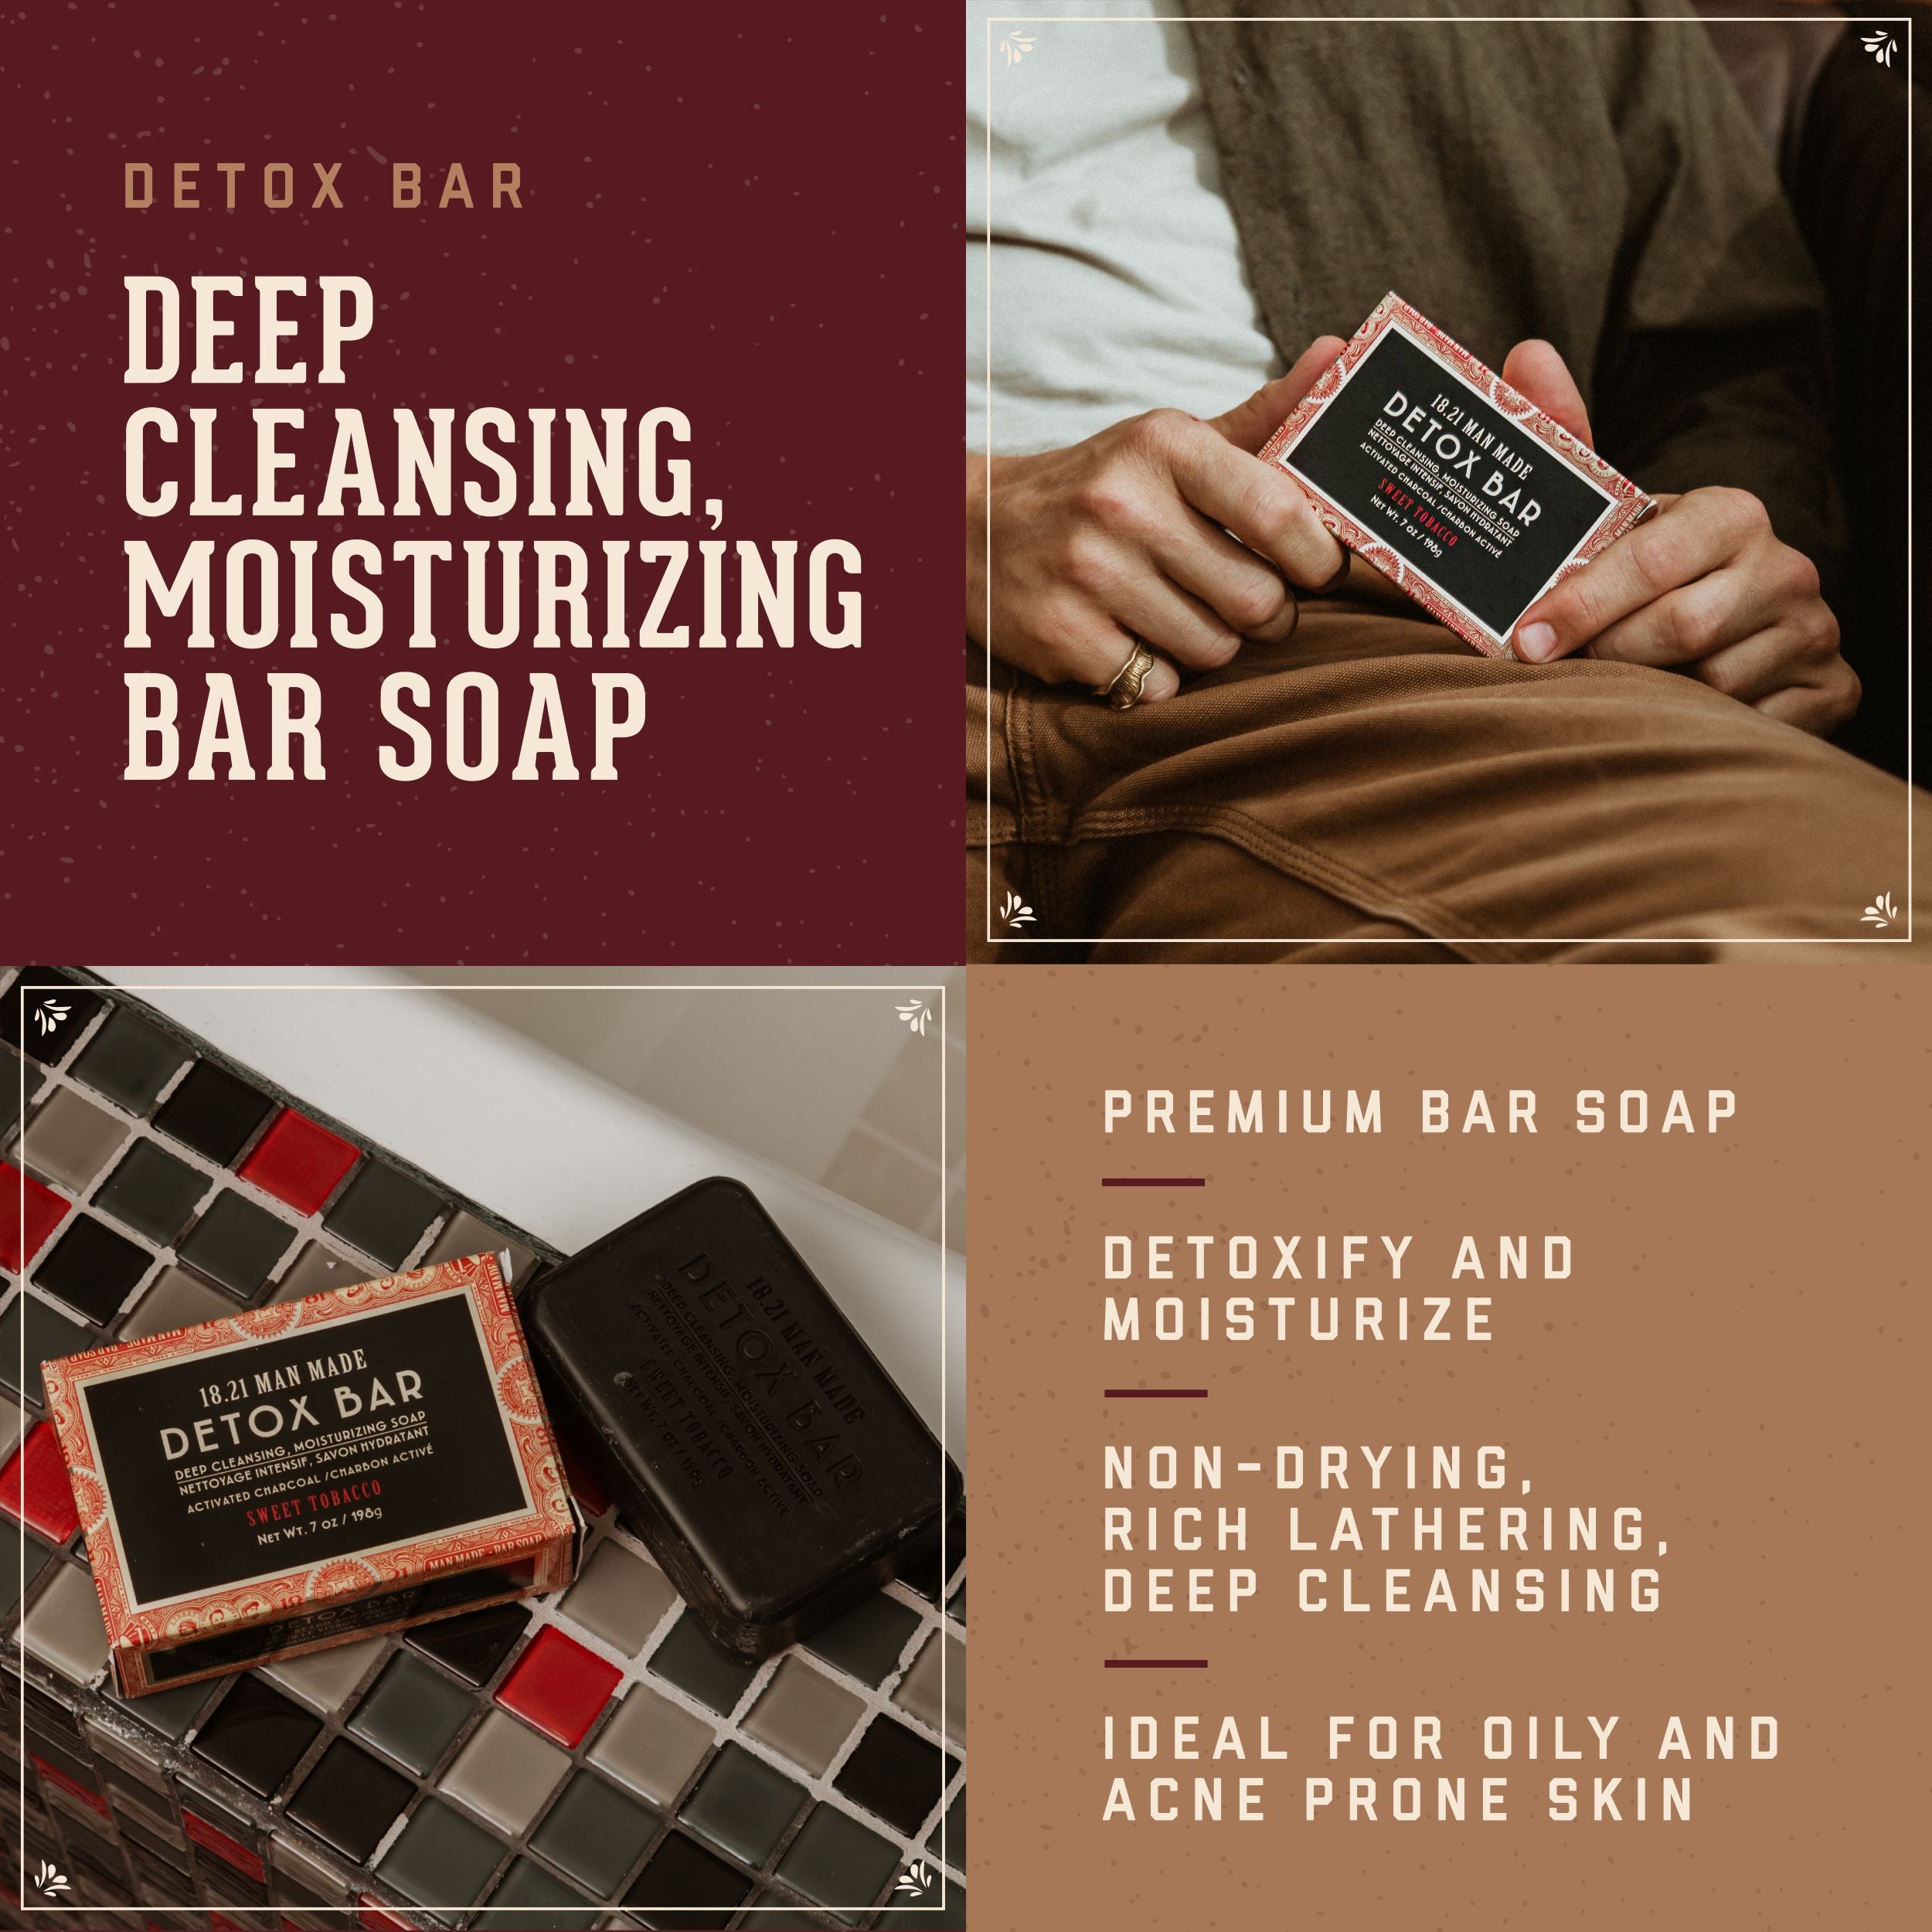 Detox Bar: deep cleansing, moisturizing bar soap.  Premium Bar Soap . Detoxify and Moisturize.  Non-drying, rich latehring, deep cleansing.  Ideal for Oily and Acne Prone Skin